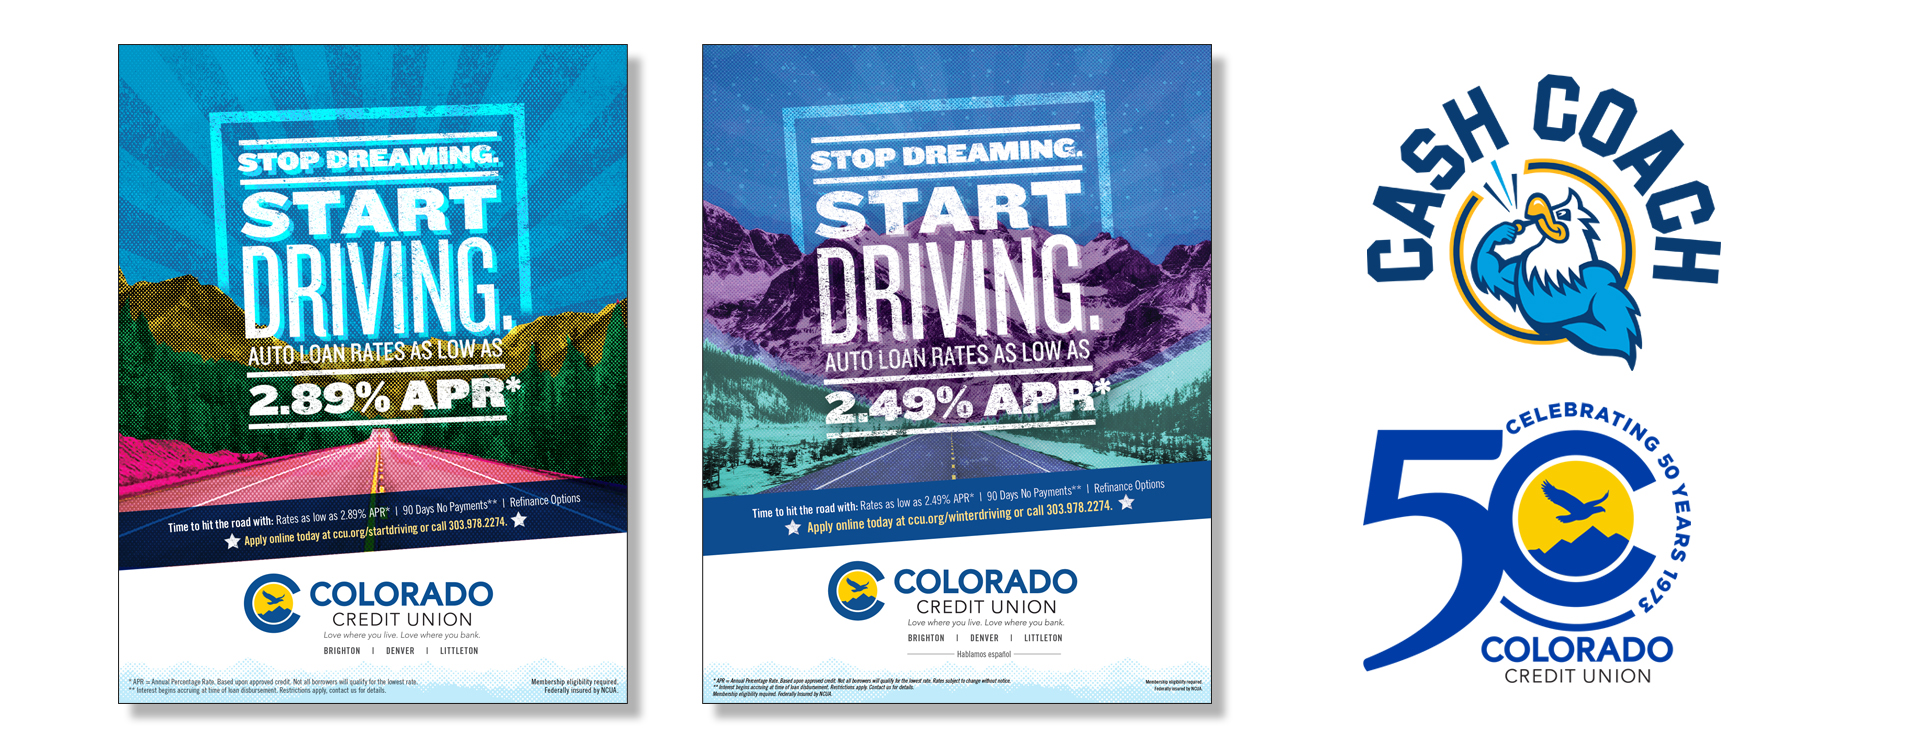 Colorado Credit Union logos and marketing materials designed by AcrobatAnt.